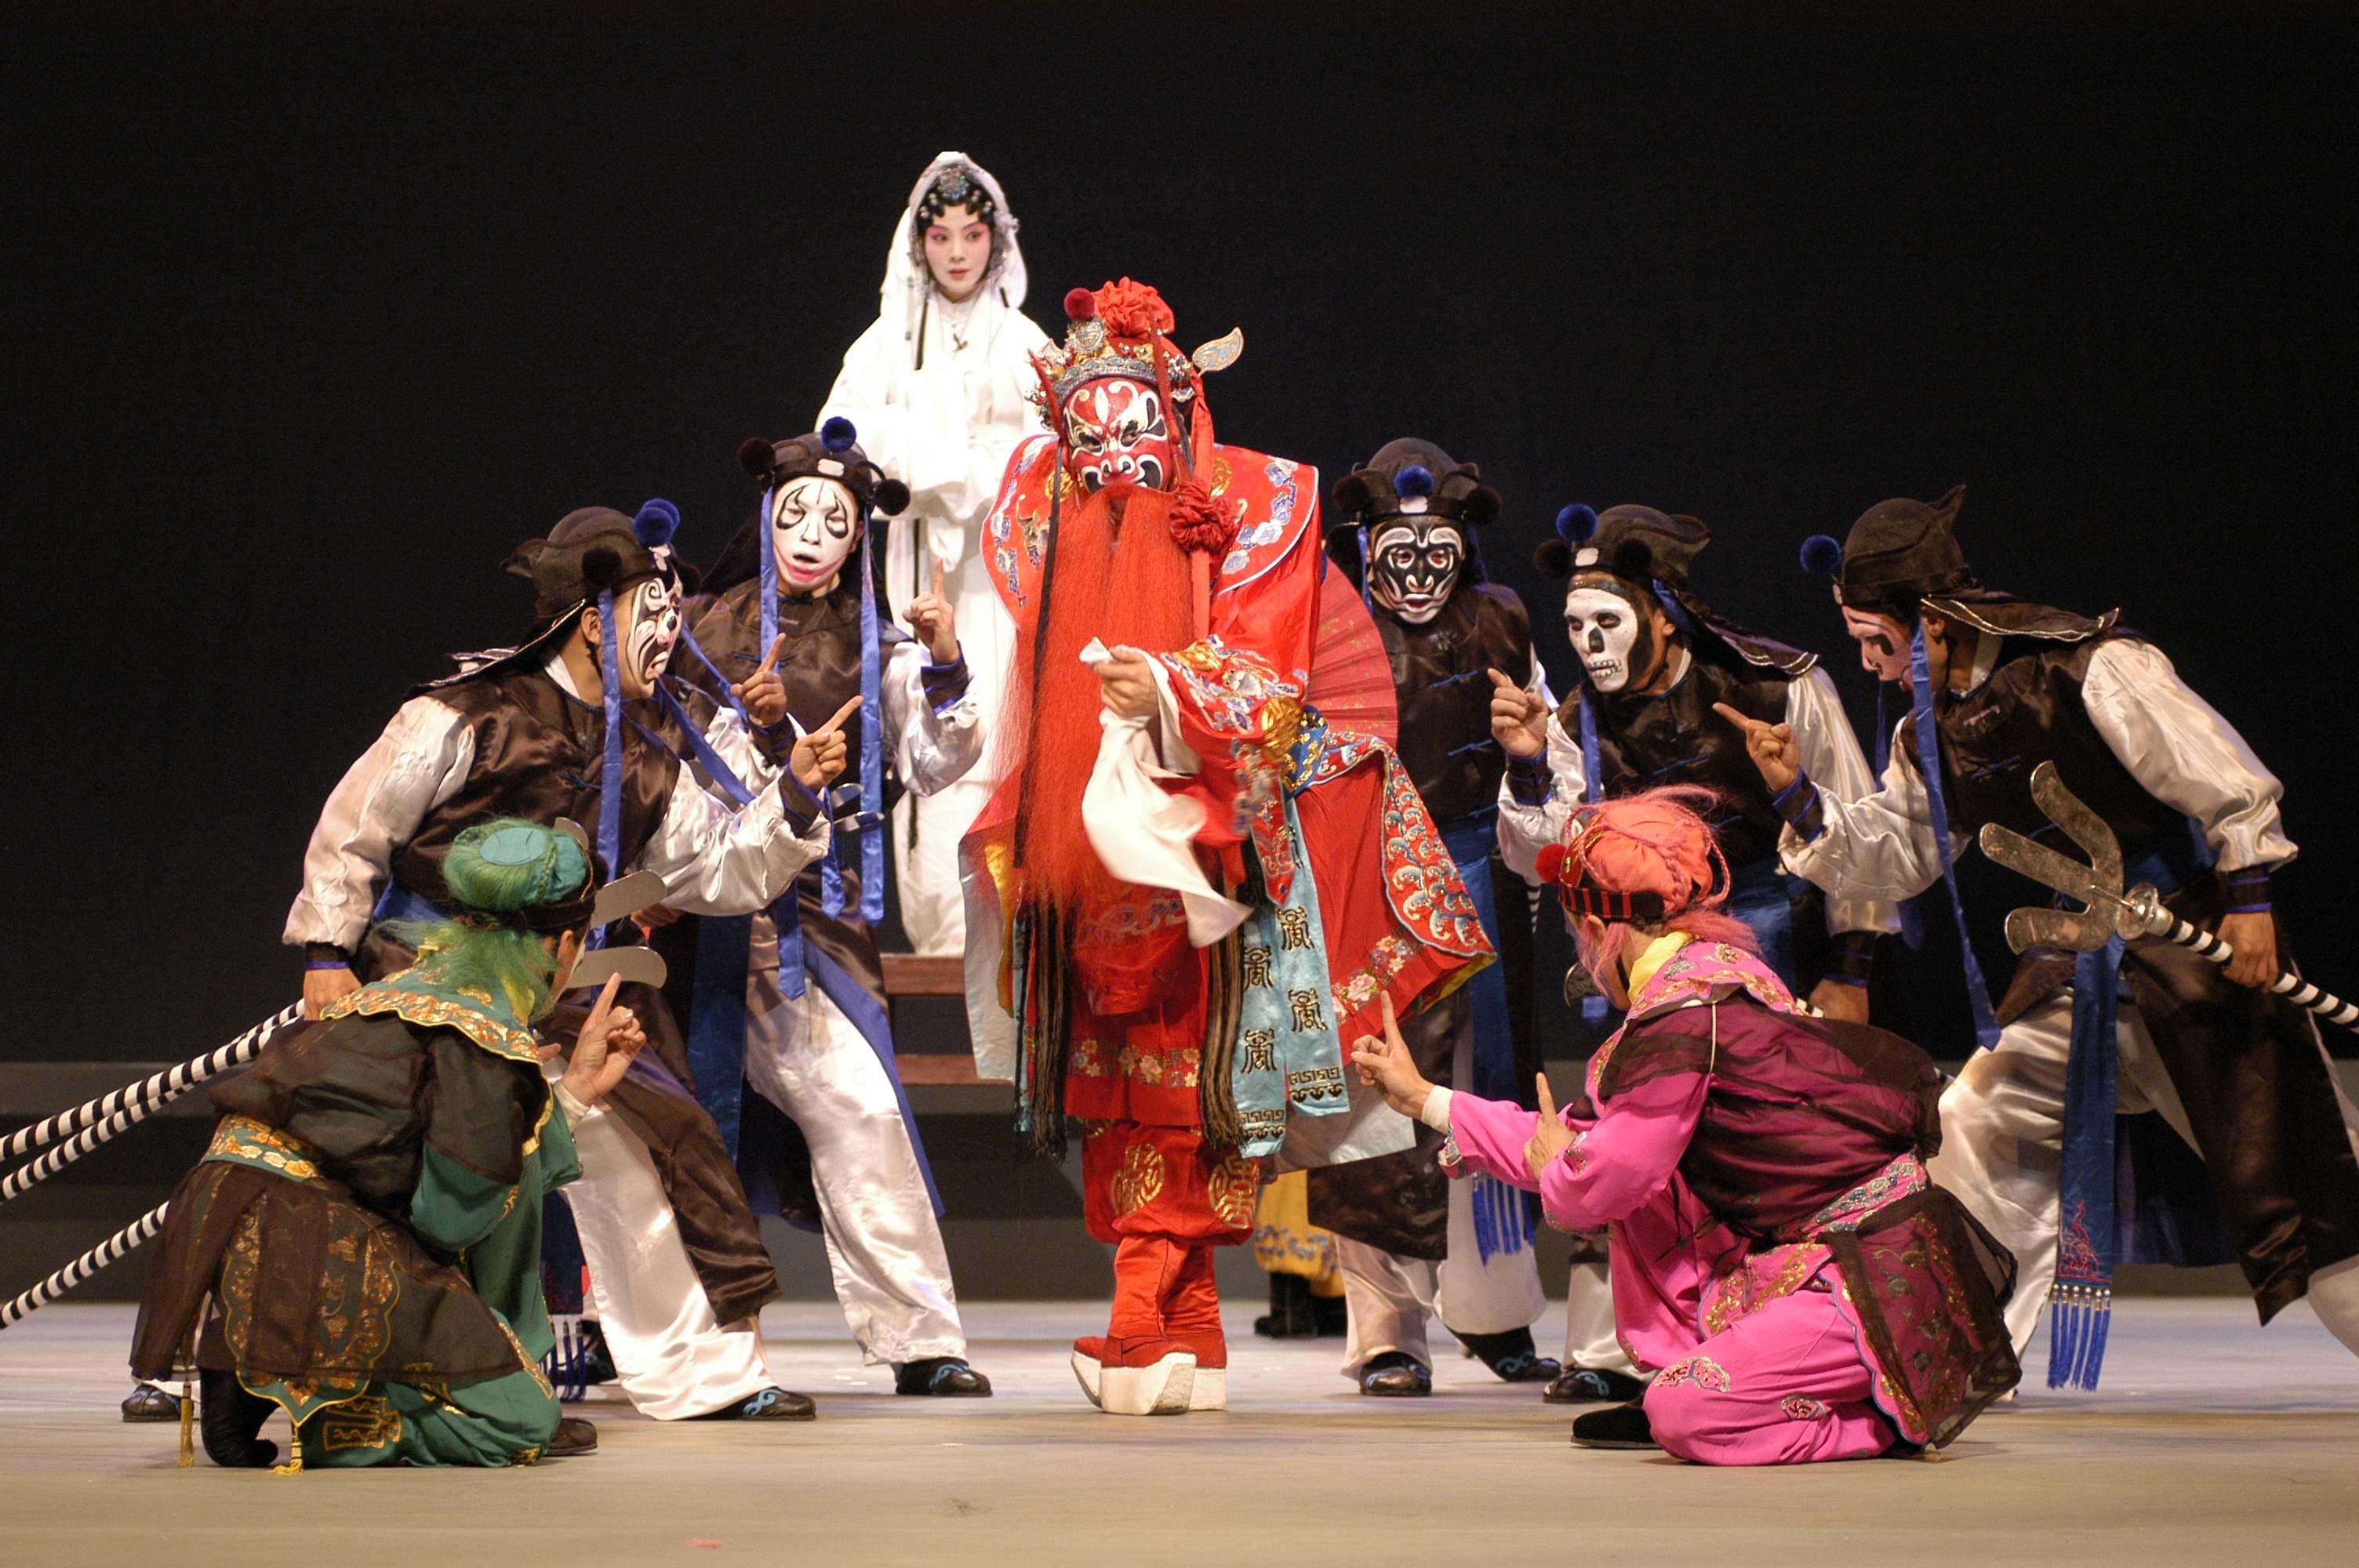 The Suzhou Kunqu Opera Theatre of Jiangsu will present "'The Peony Pavilion' - The Youth Version" at the Chinese Opera Festival 2023 in July, featuring the original cast. Photo shows a scene of Part Two: "Love between a Mortal and a Ghost".